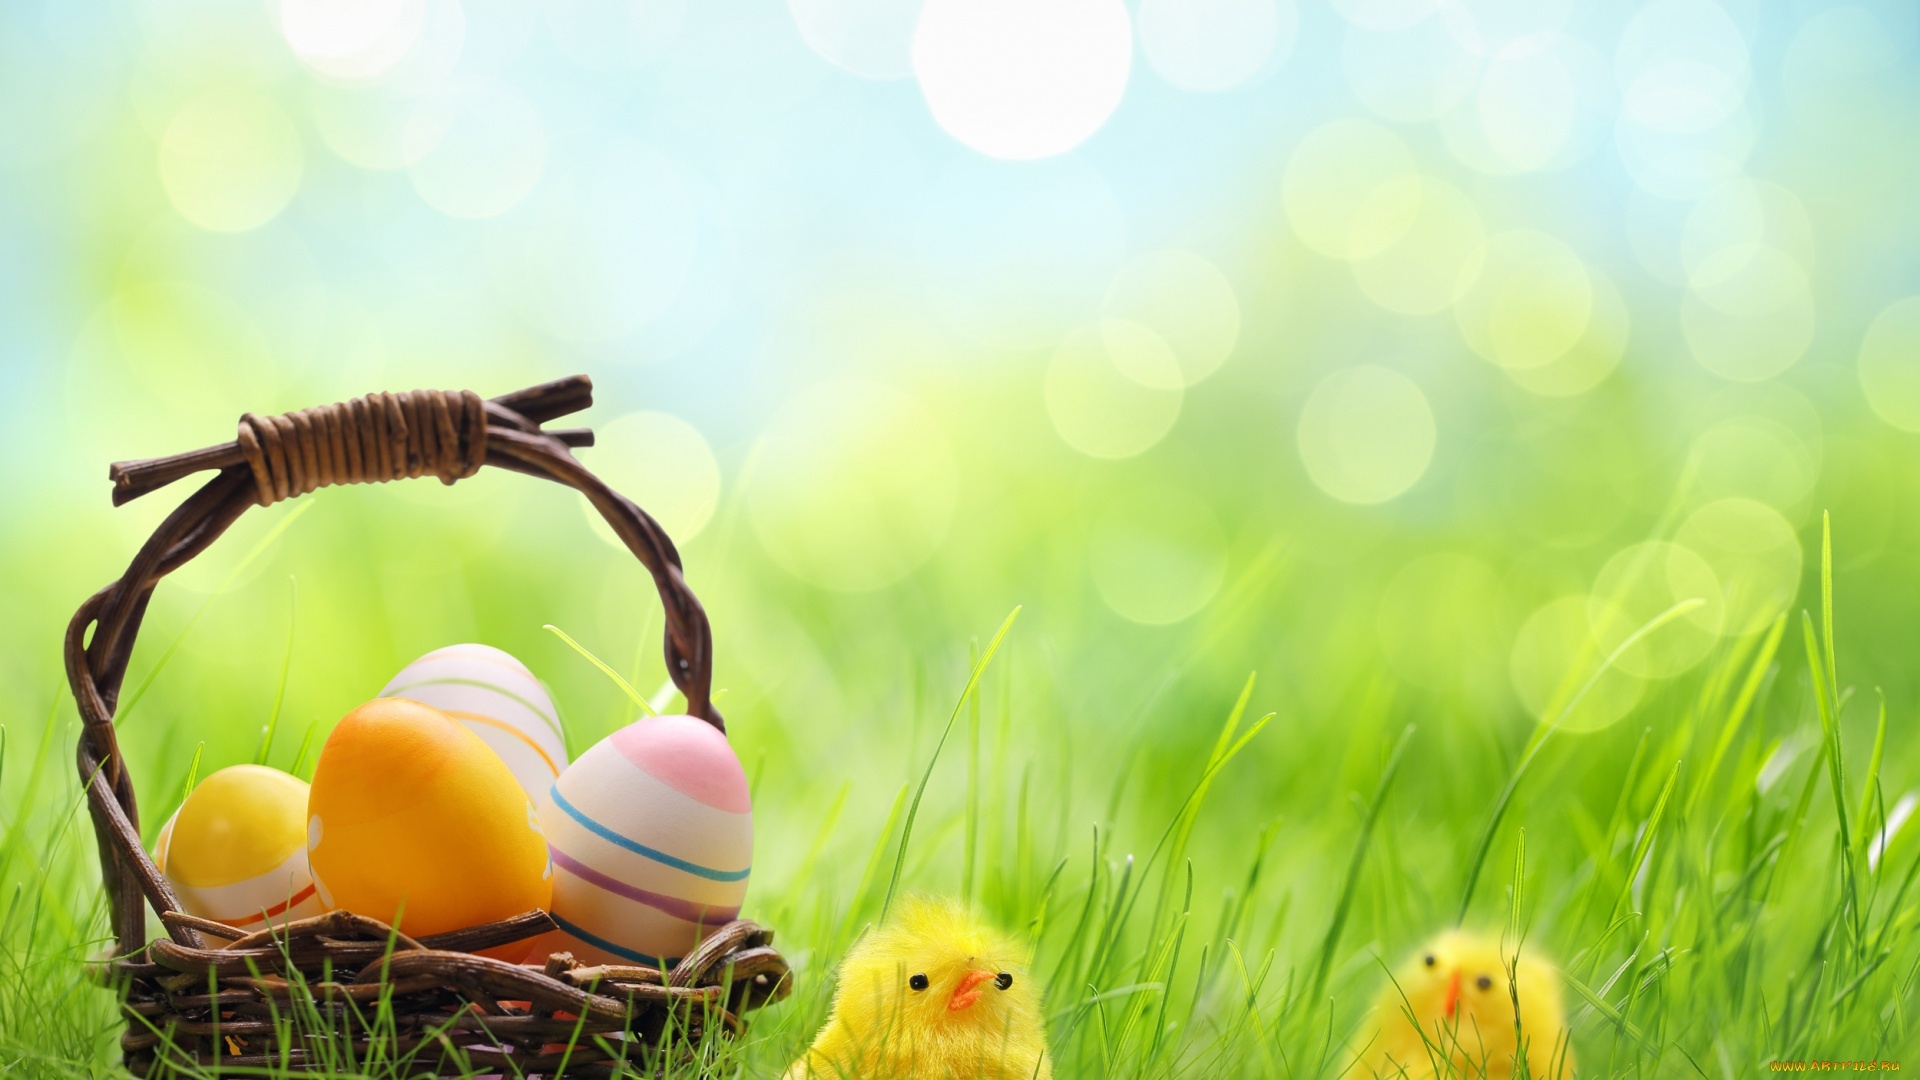 Background For Easter Card HD Wallpaper